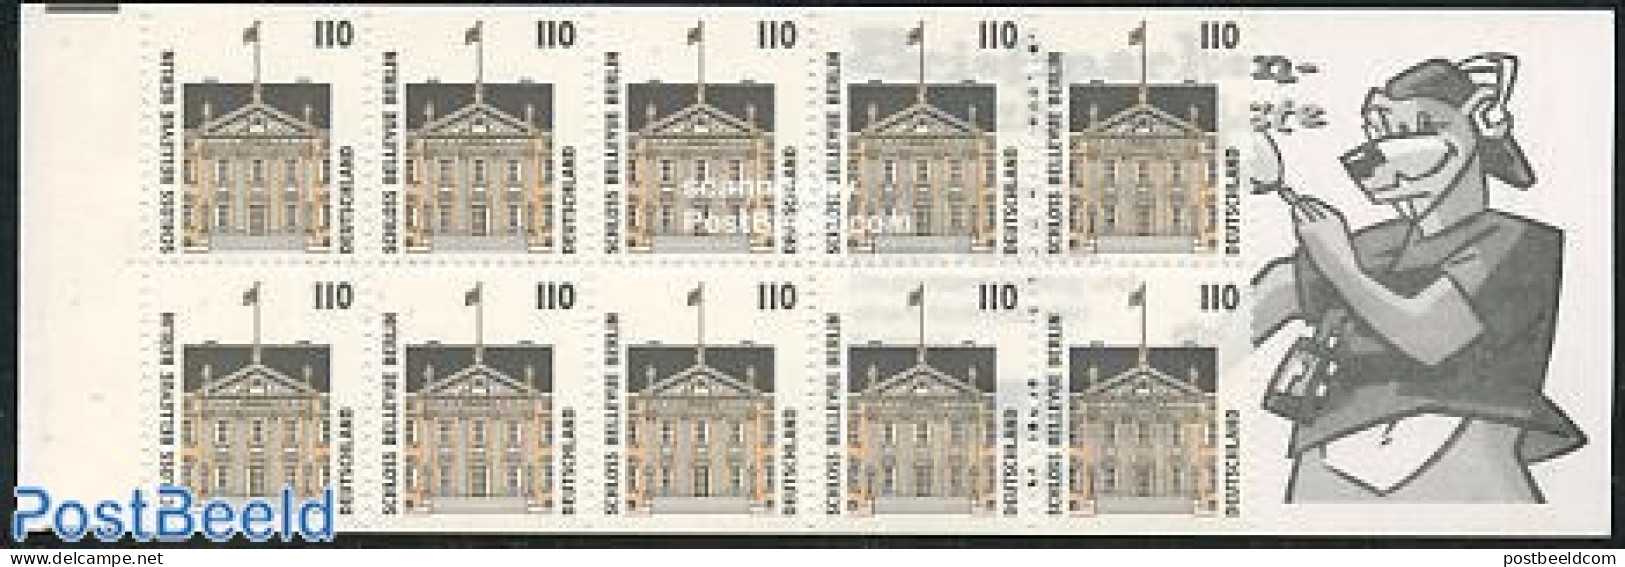 Germany, Federal Republic 1997 Bellevue Berlin Booklet, Mint NH, Stamp Booklets - Neufs